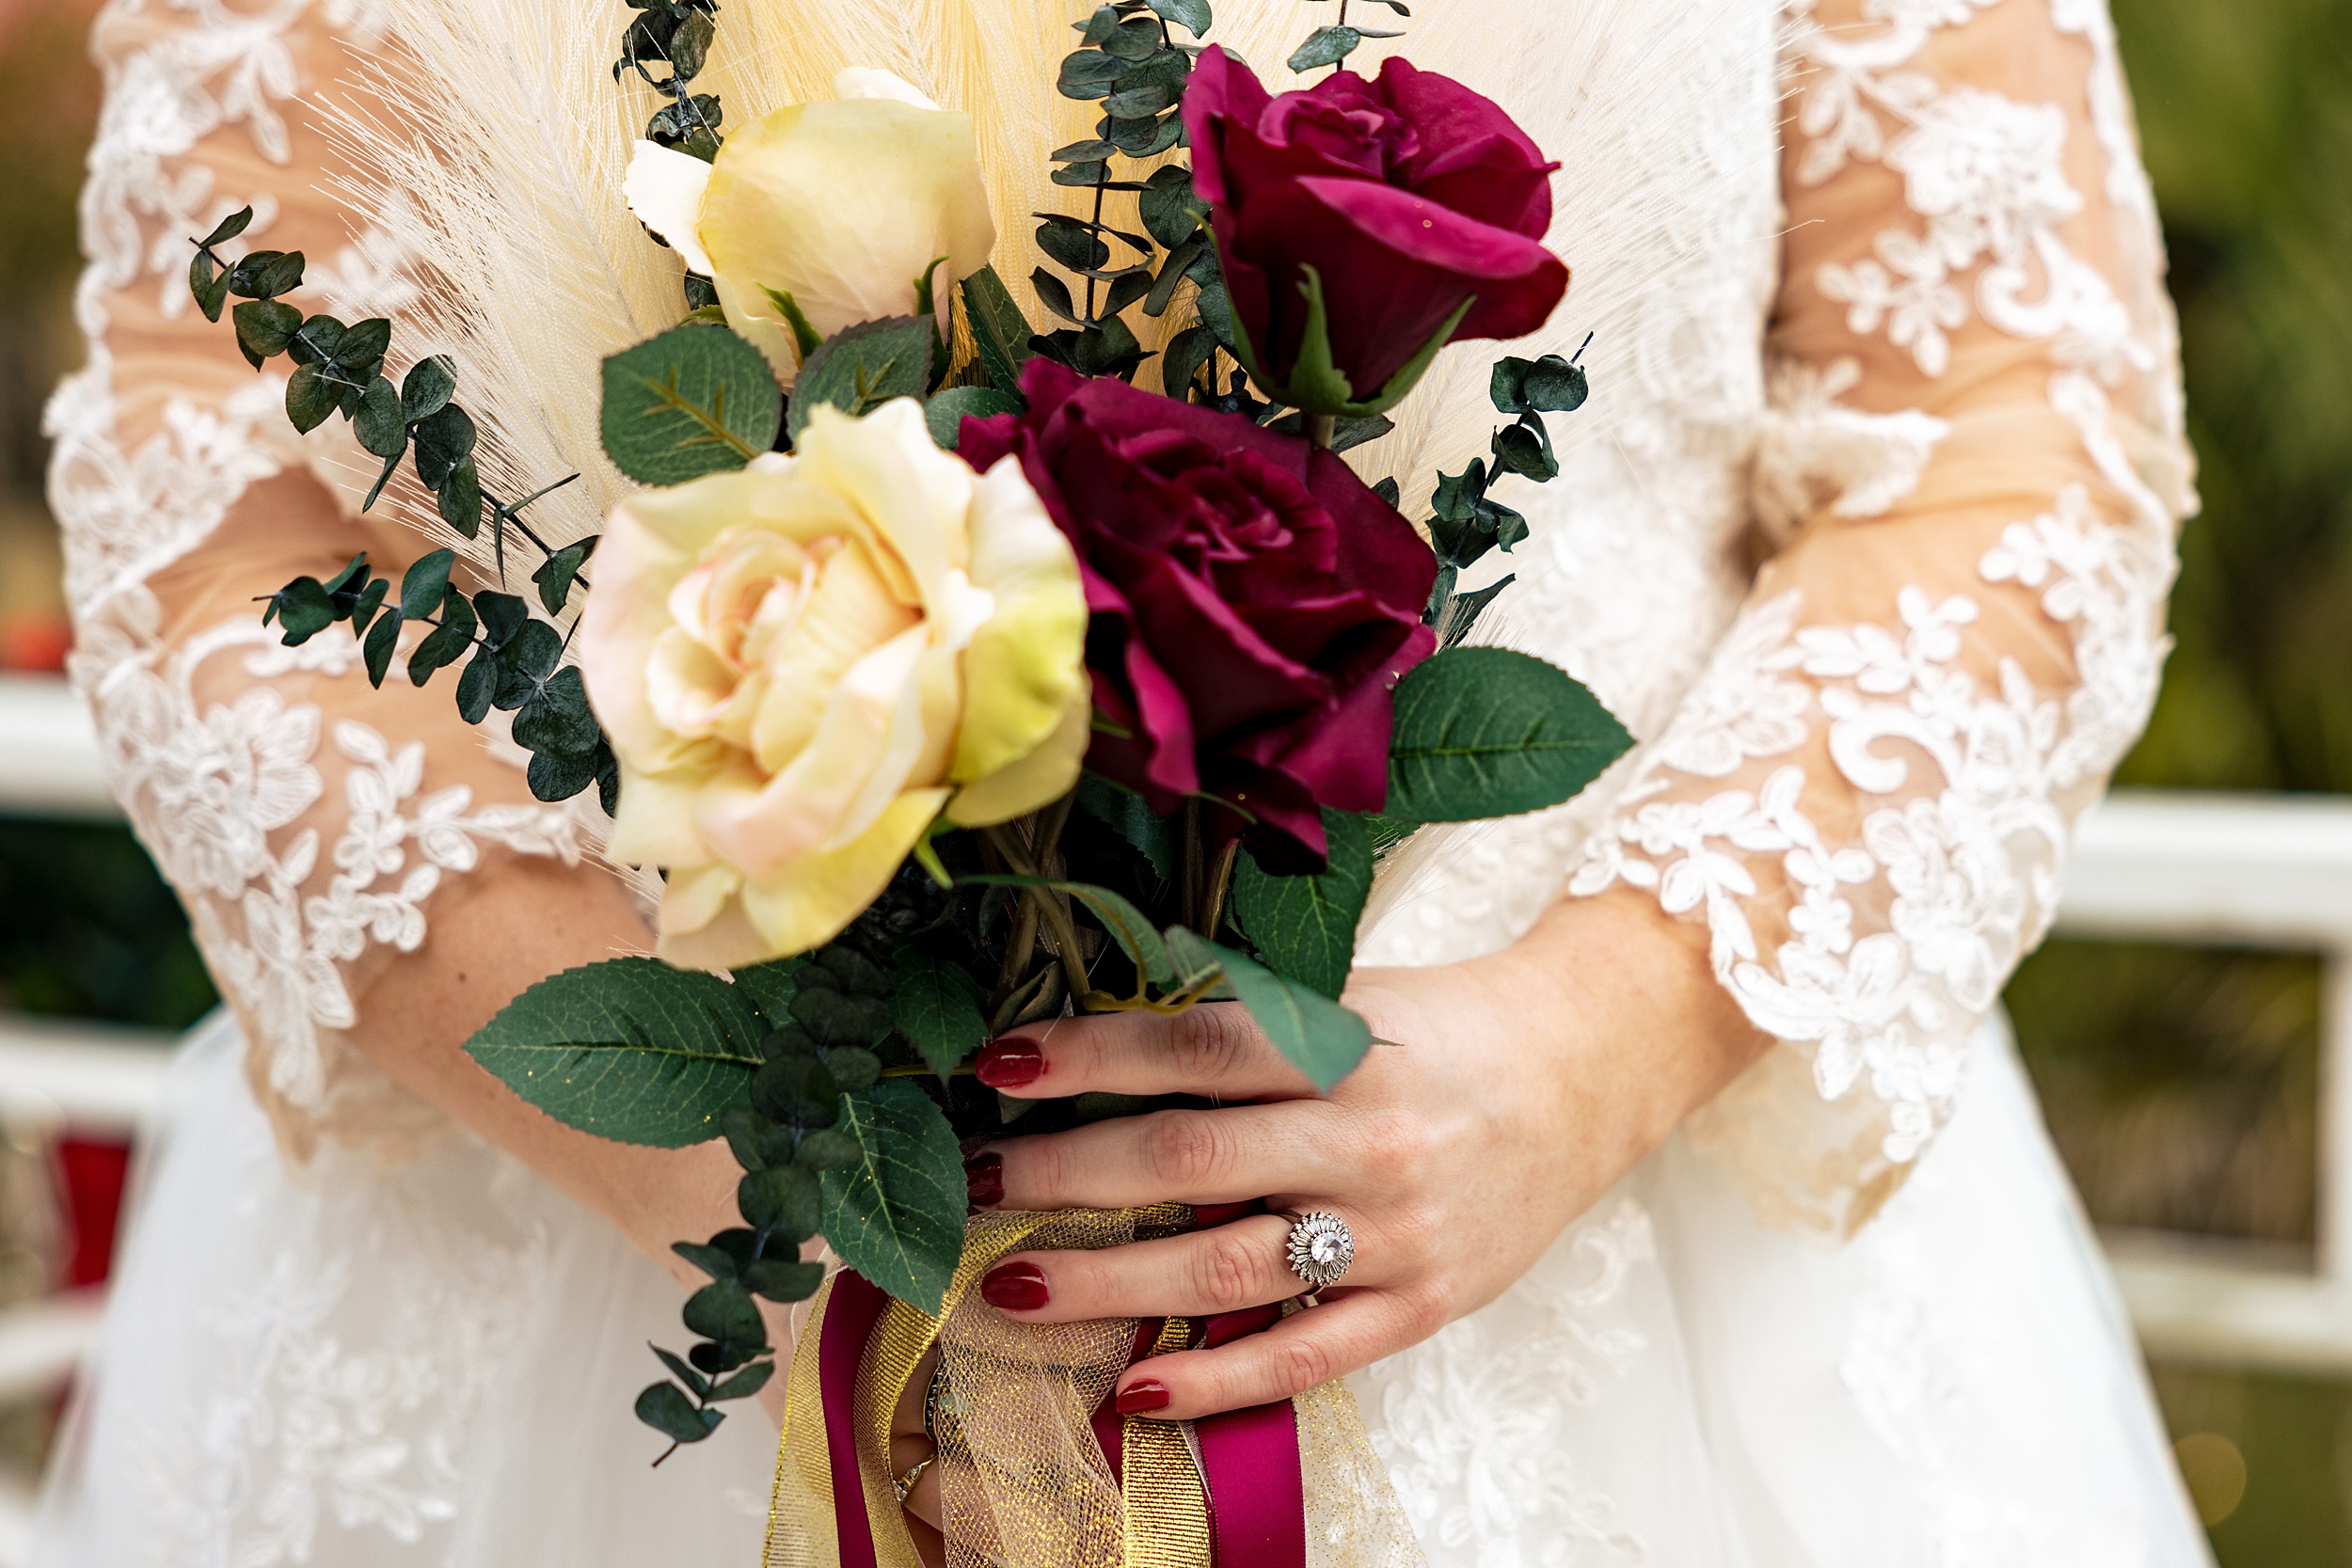 Details of a bride in a lace dress holding her white and red bouquet during her paradise cove wedding